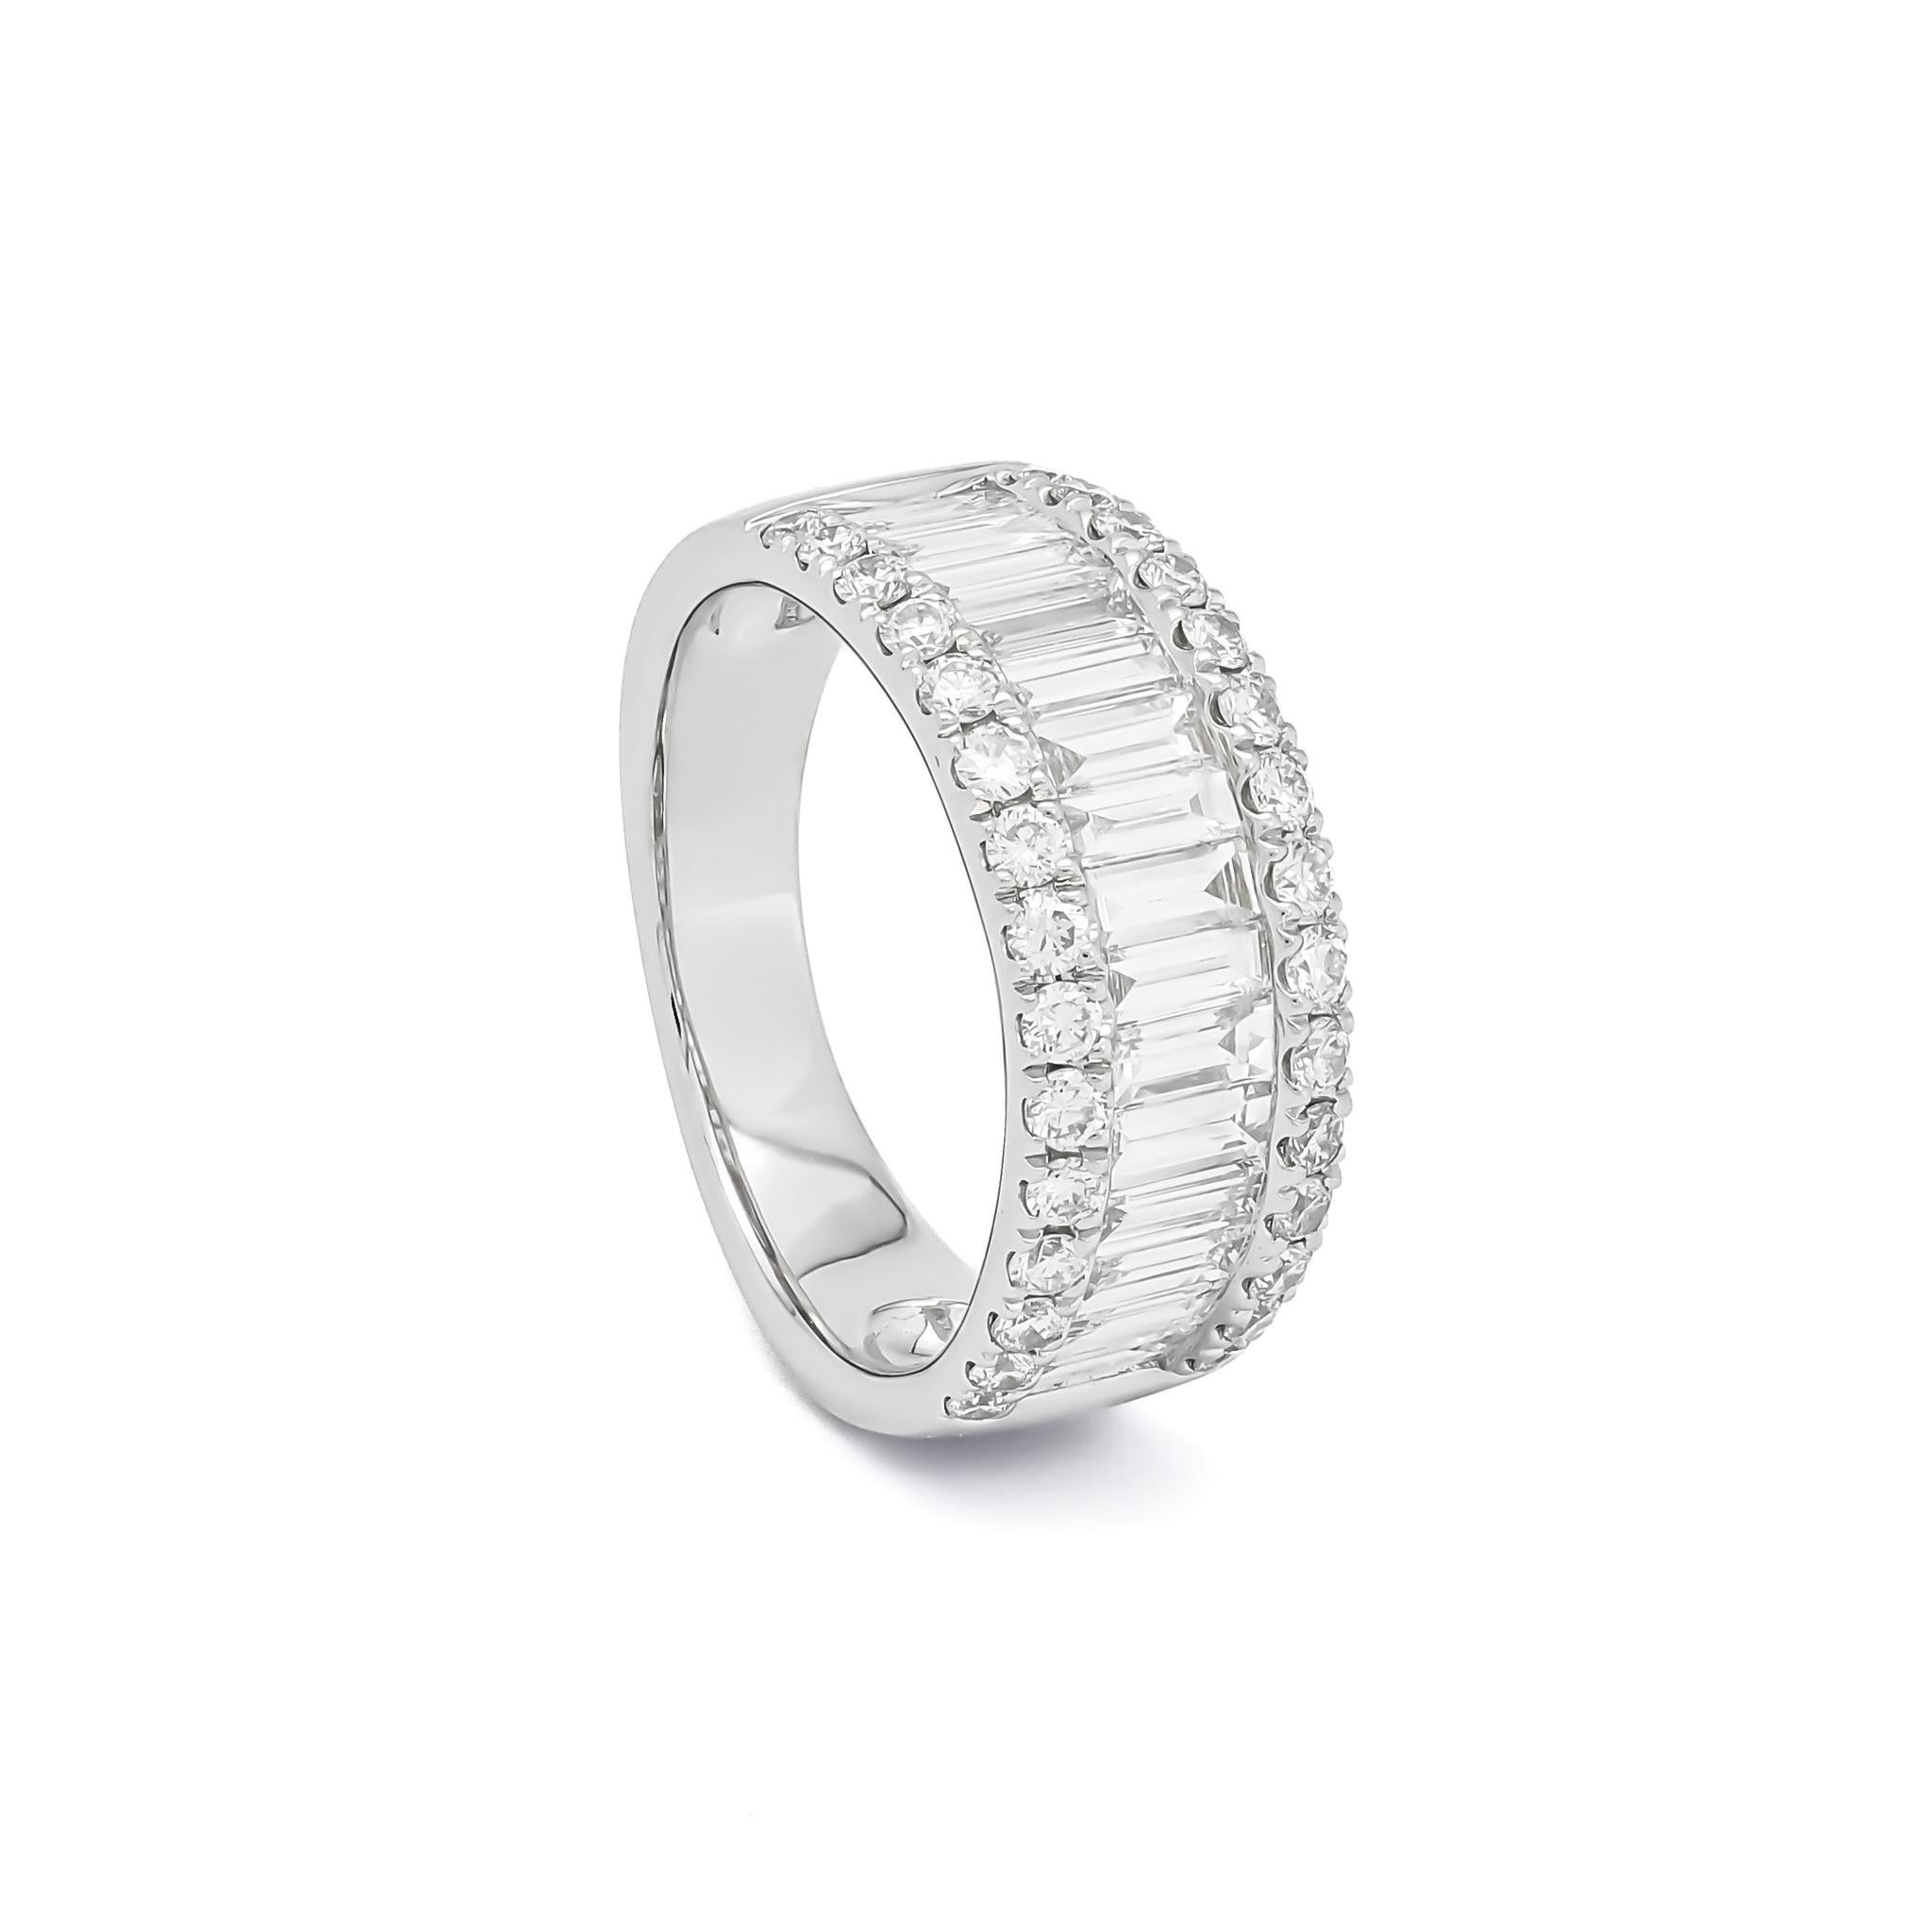 Baguette Cut Natural Diamonds 1.78 cts 18 Karat White Gold Anniversary Half Band Ring For Sale